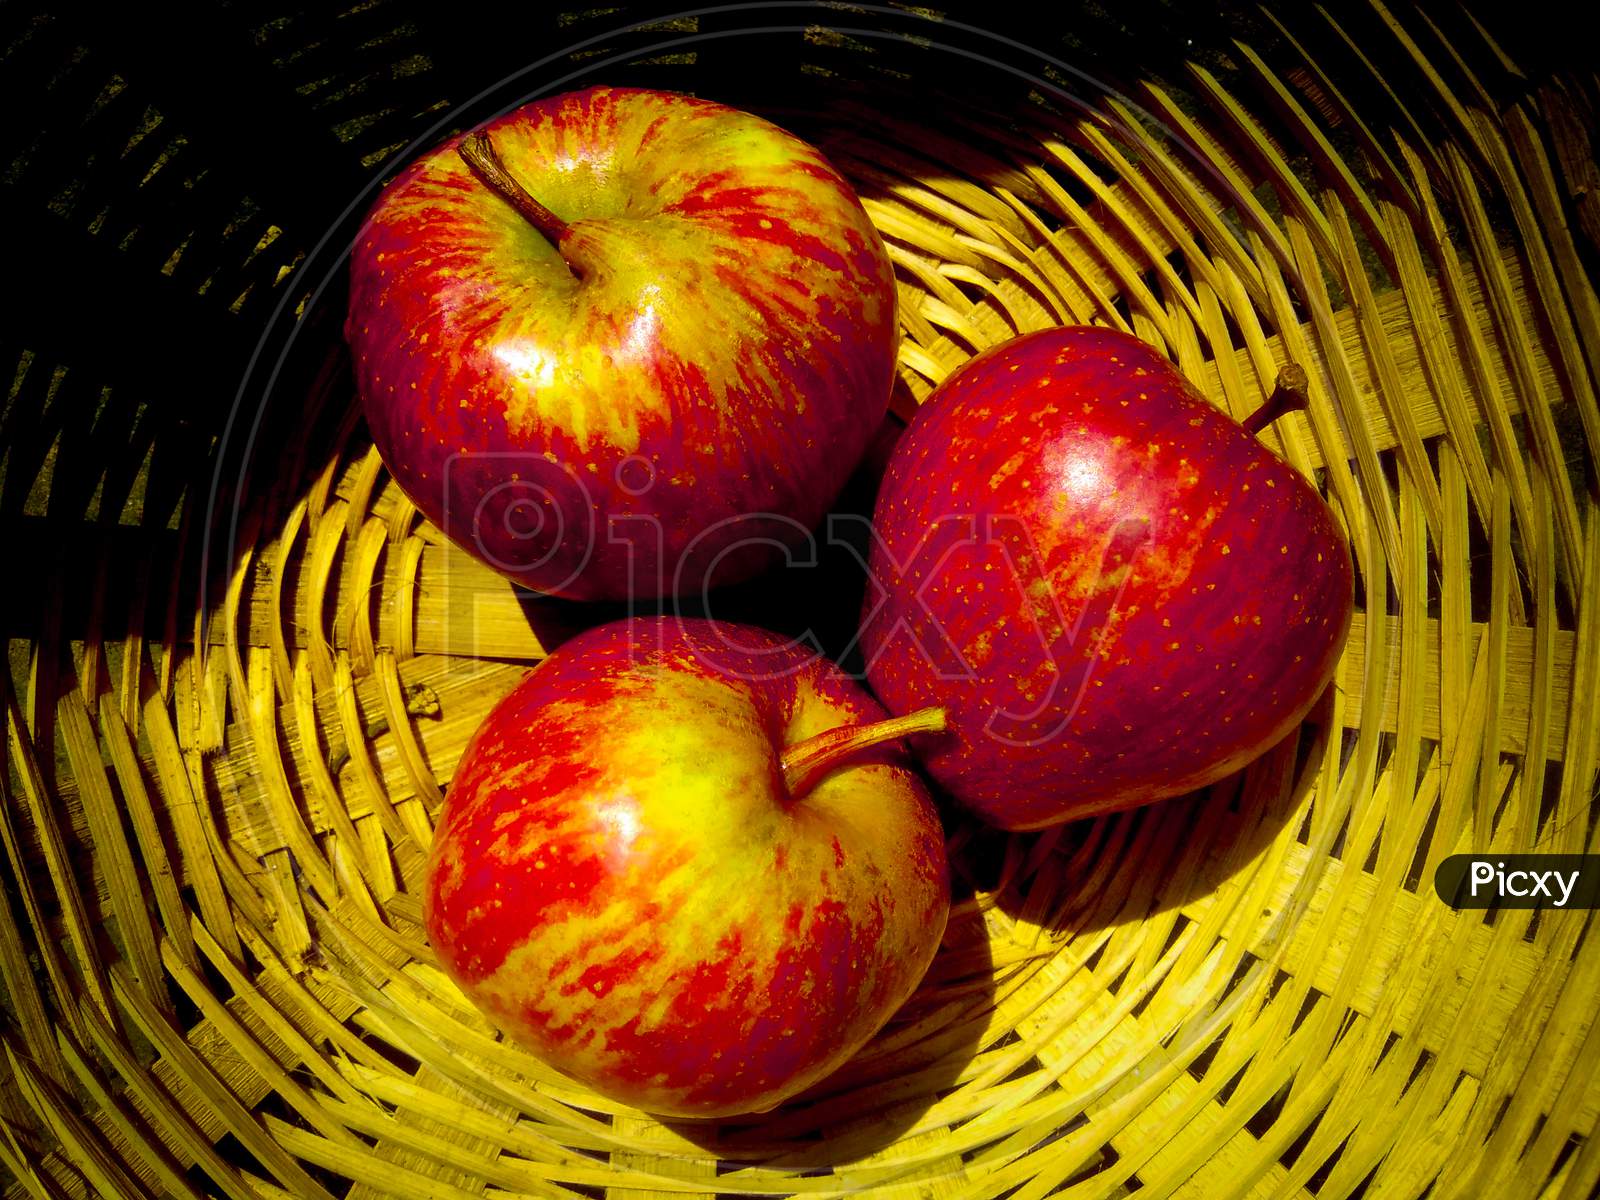 Apples in the basket. Three apples are in the basket.